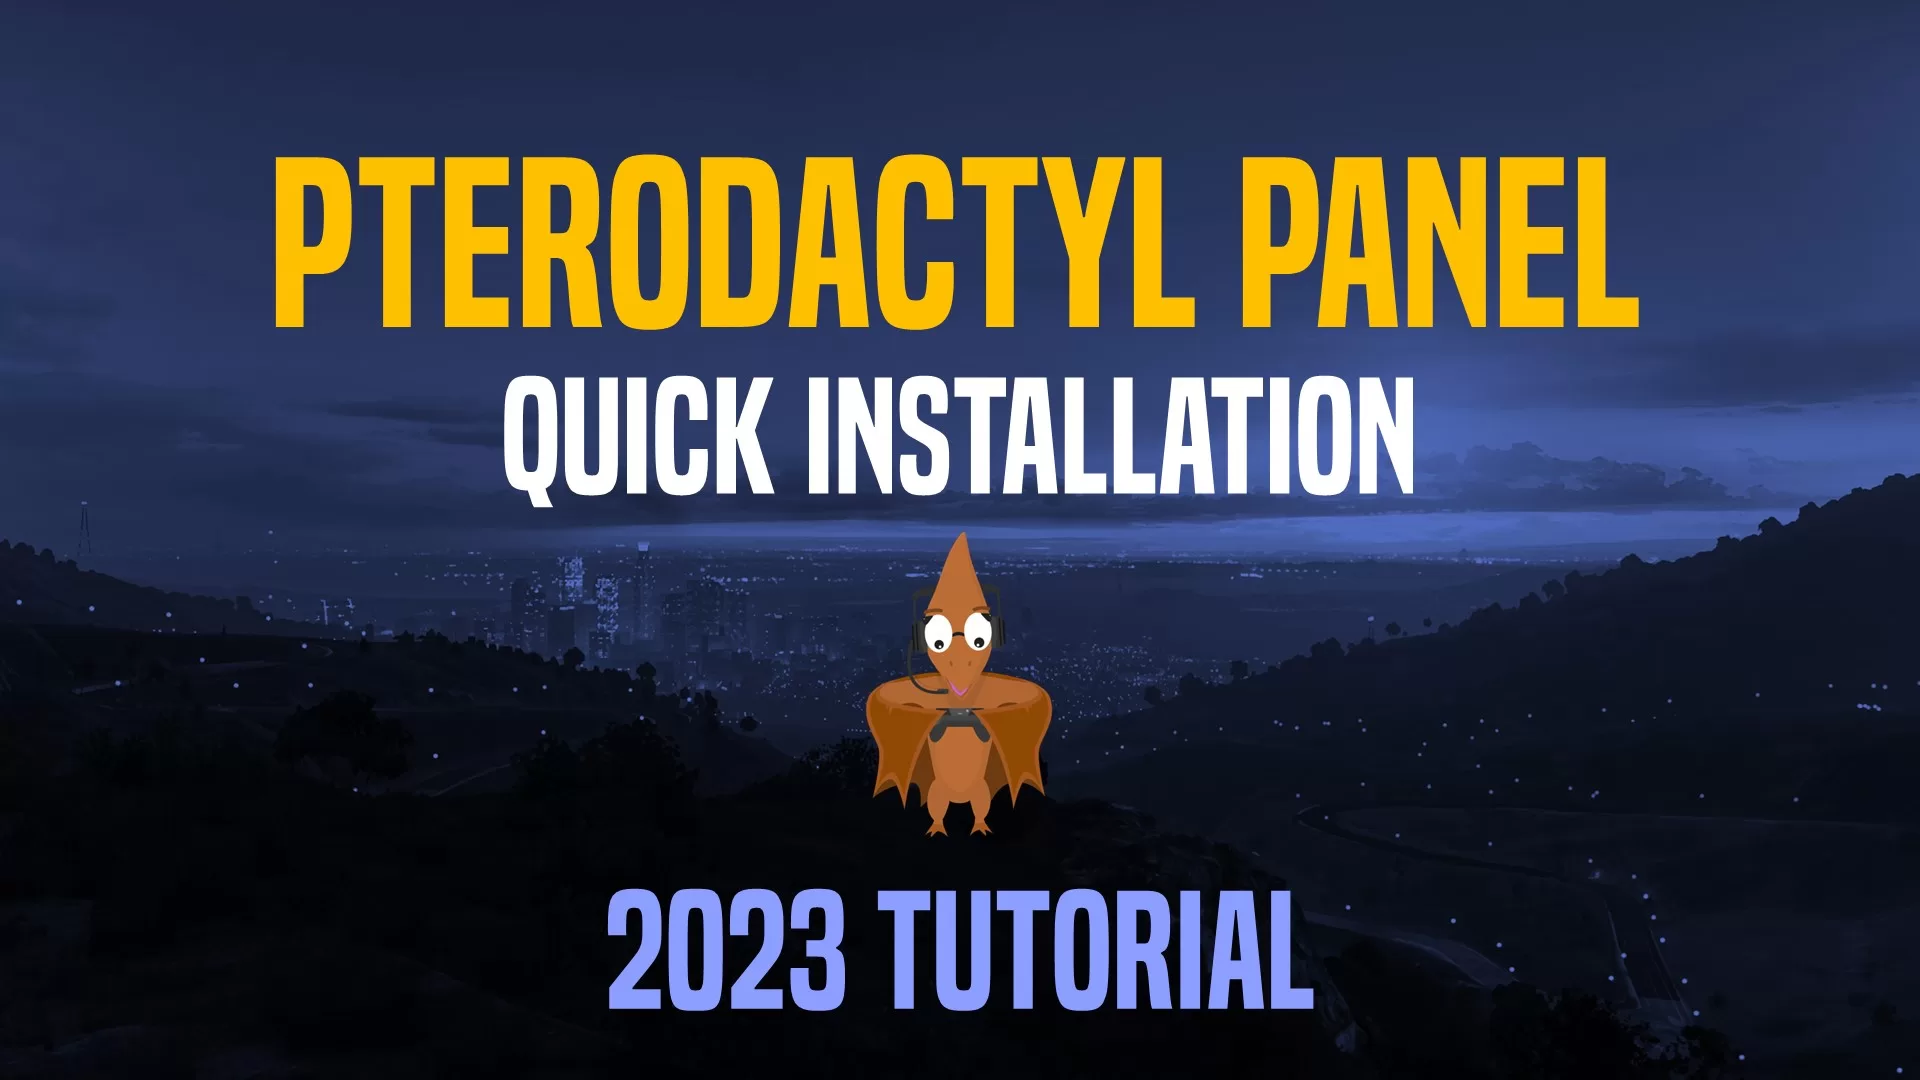 How to install the Pterodactyl panel?